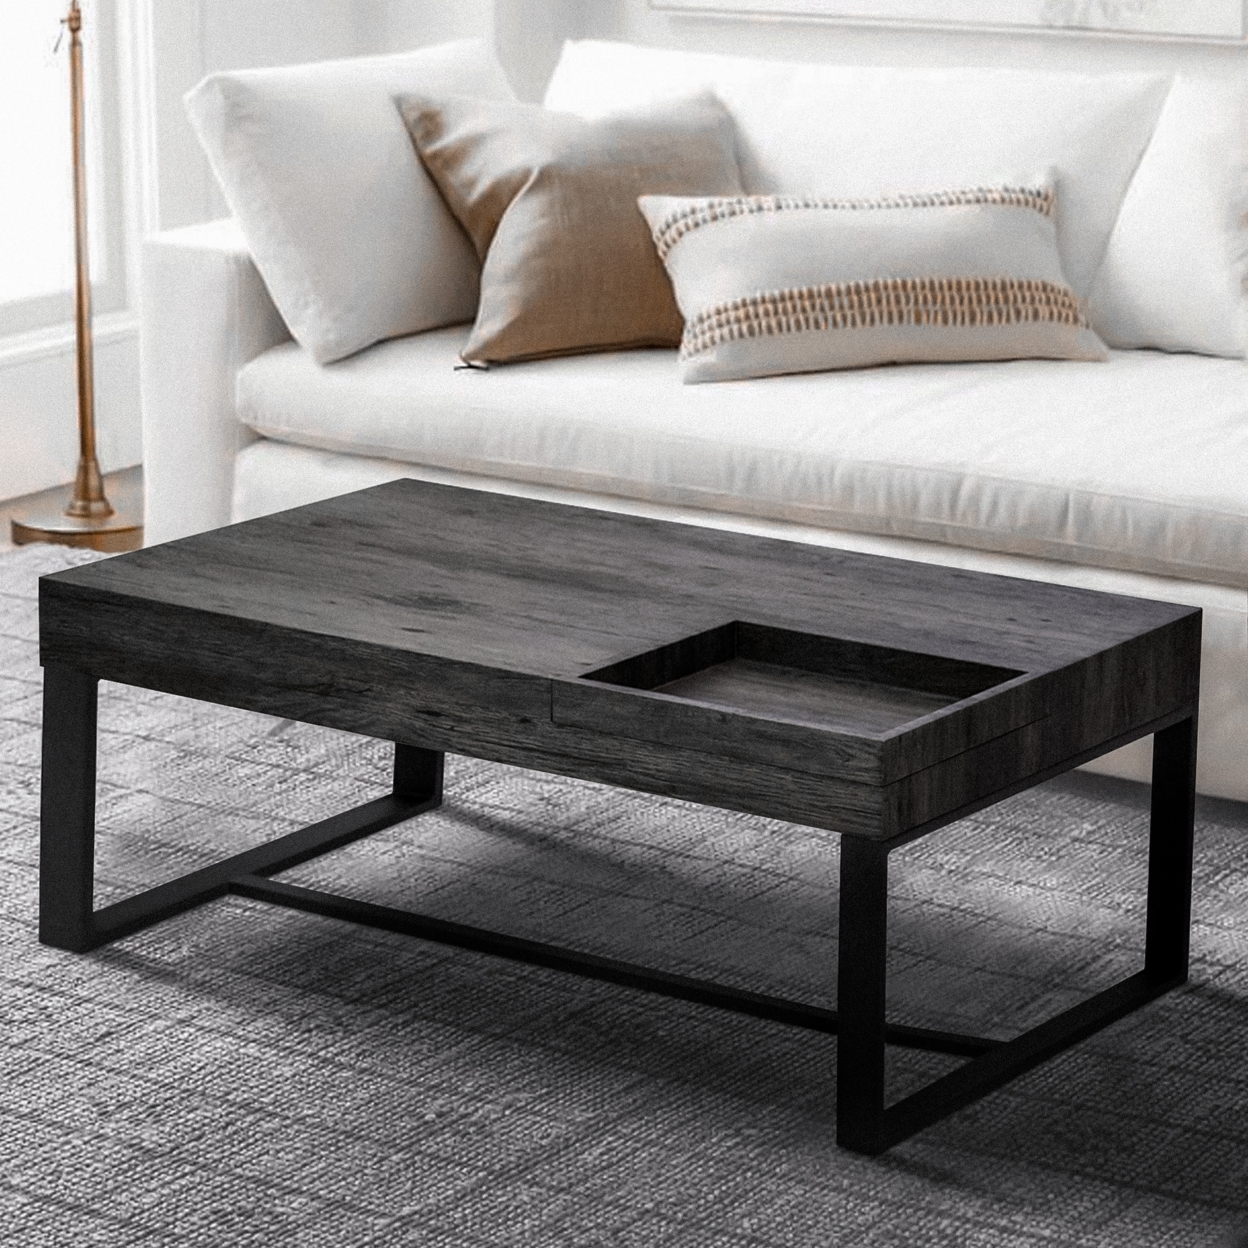 Rectangular Wooden Coffee Table With Hidden Storage And Metal Sled Base, Gray And Black- Saltoro Sherpi